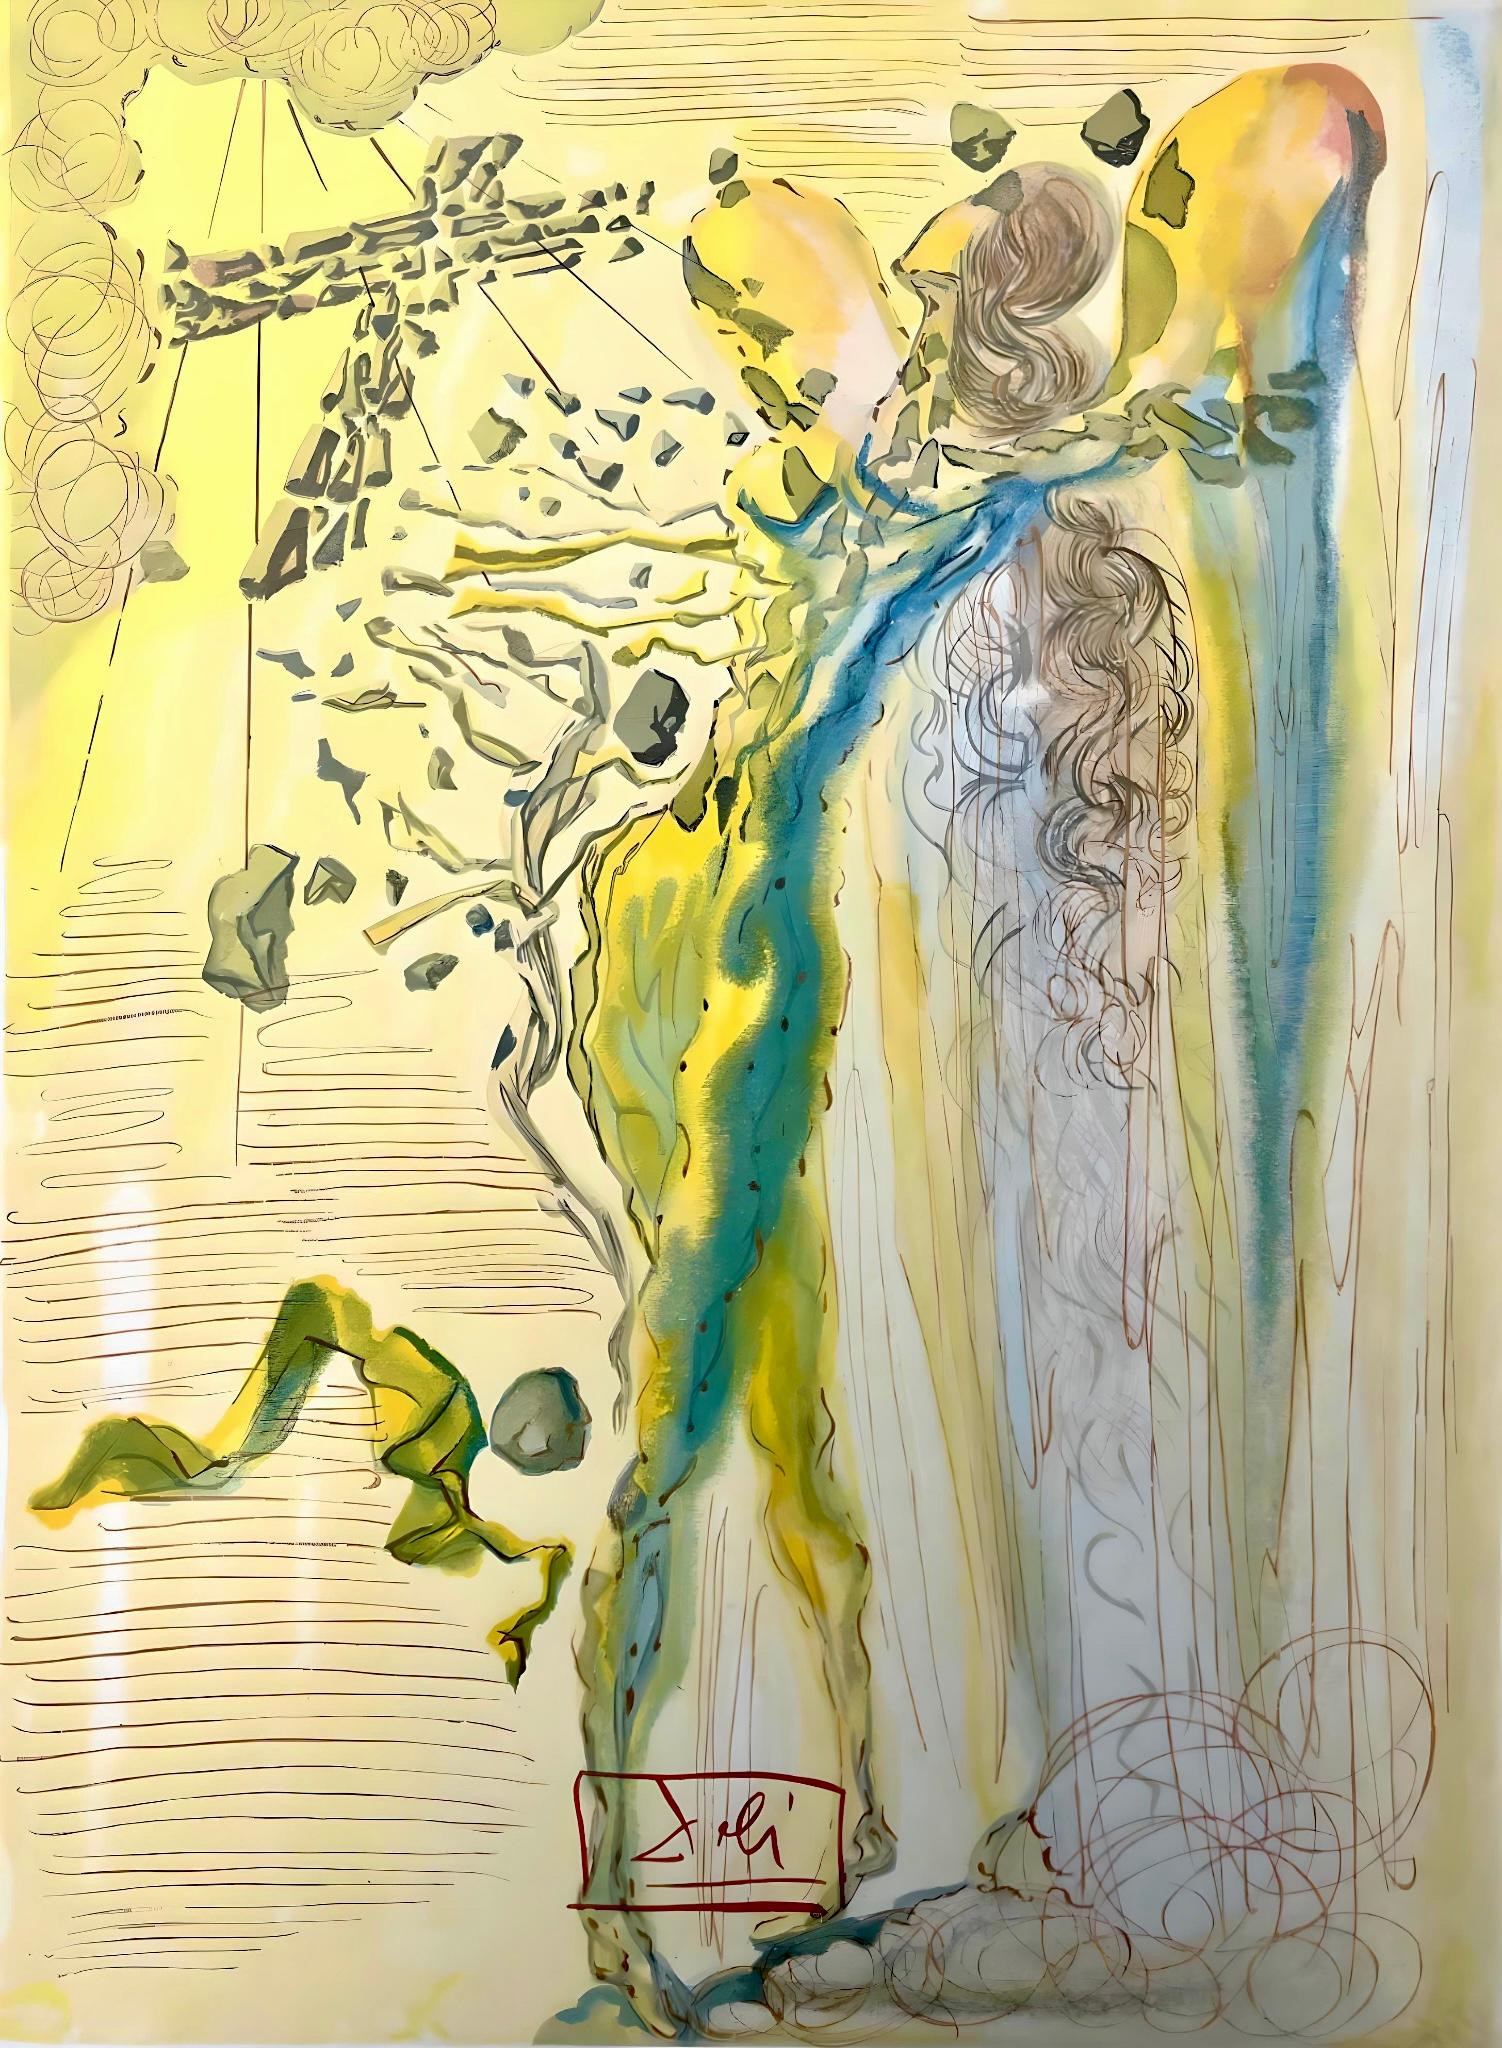 Artist: Salvador Dali (1904-1989)
Suite: Göttliche Komödie (The Divine Comedy)
Year: 1974
Medium: Wood engraving in colors on BFK Rives wove paper tipped to Arches paper mounts
Inscription: Signed in block, and unnumbered, as issued
Edition: 1,000